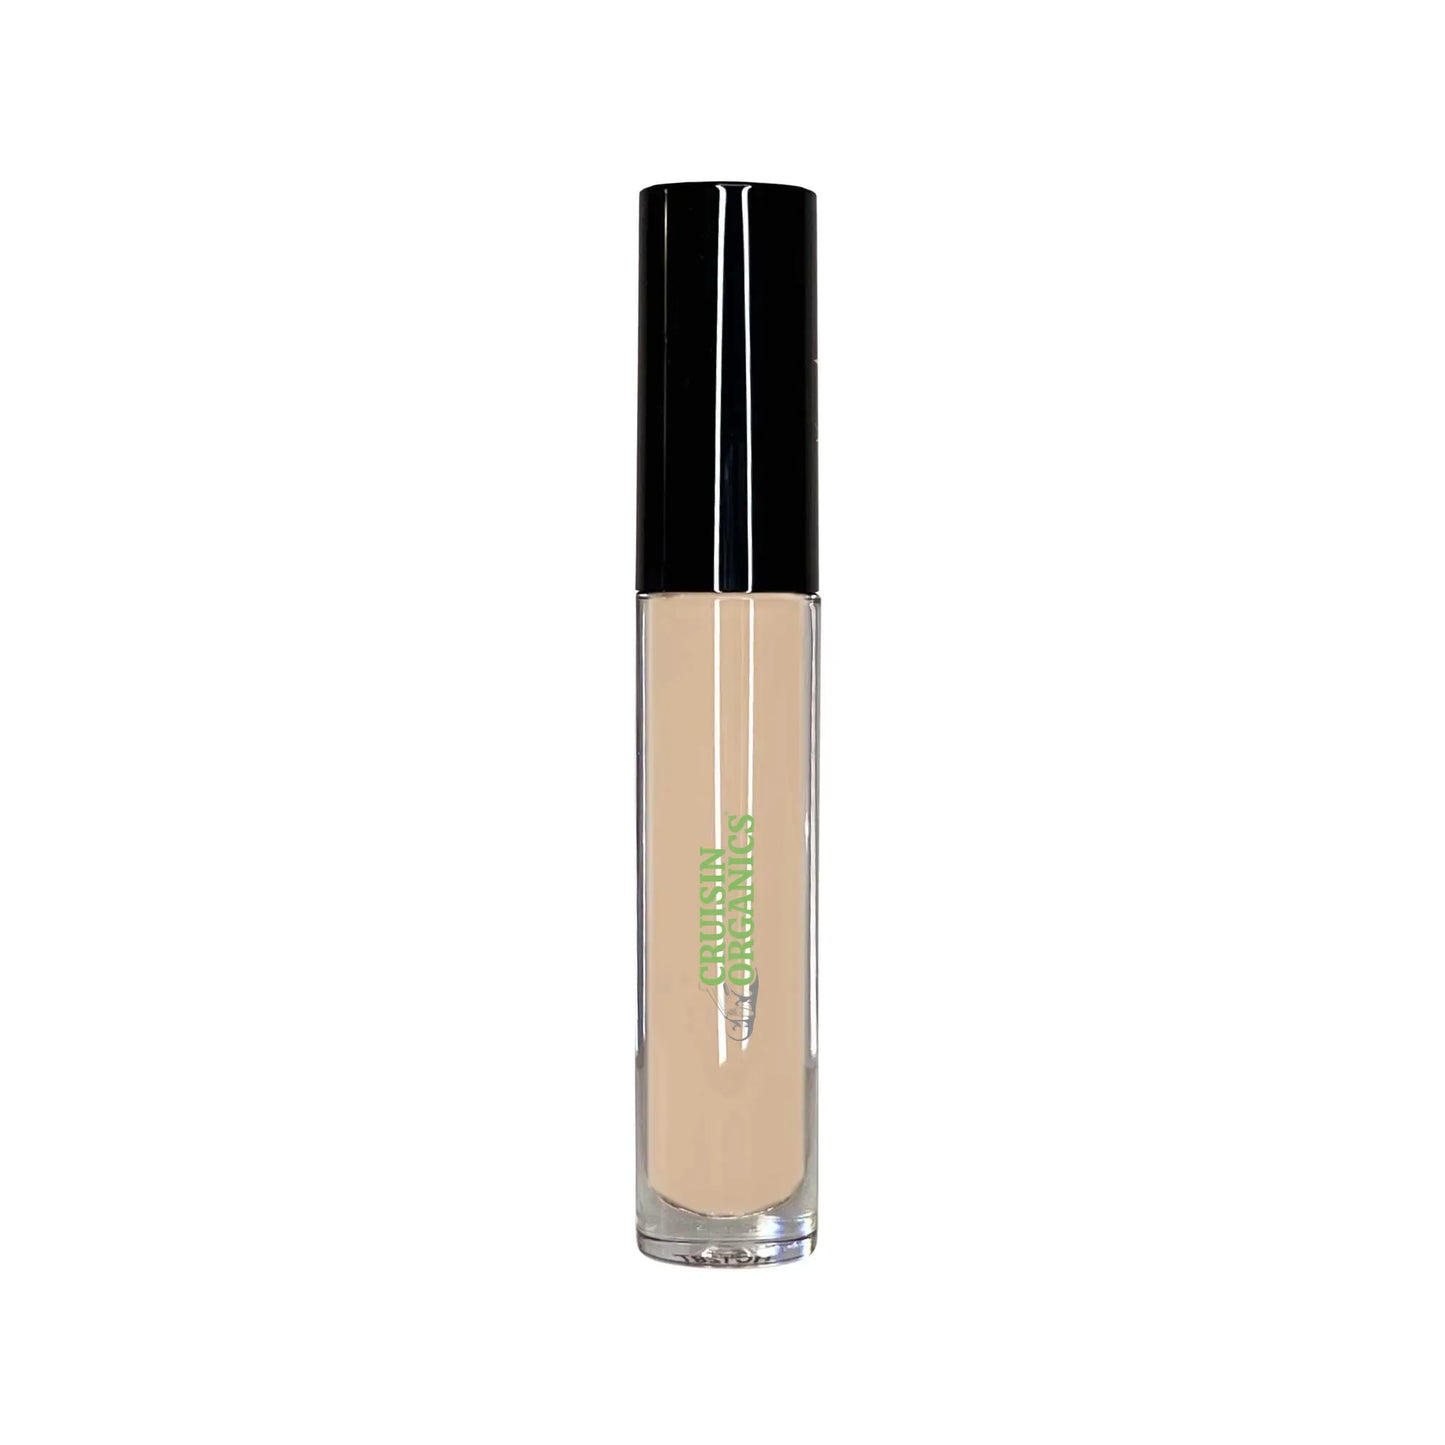 Cruisin Organics Bella Concealing Cream. 13 shades of concealer. Our concealing cream is a full-coverage, brightening product! Spot treatments and color correctors can be layered over your foundation. This super creamy formulation is blended and debuffs to brighten and conceal to obtain more youthful skin tones. Doe foot applicator refers to a small sponge attached to the cap of cosmetic products, wide and slightly rounded for simple dabs on tough, dark spots.